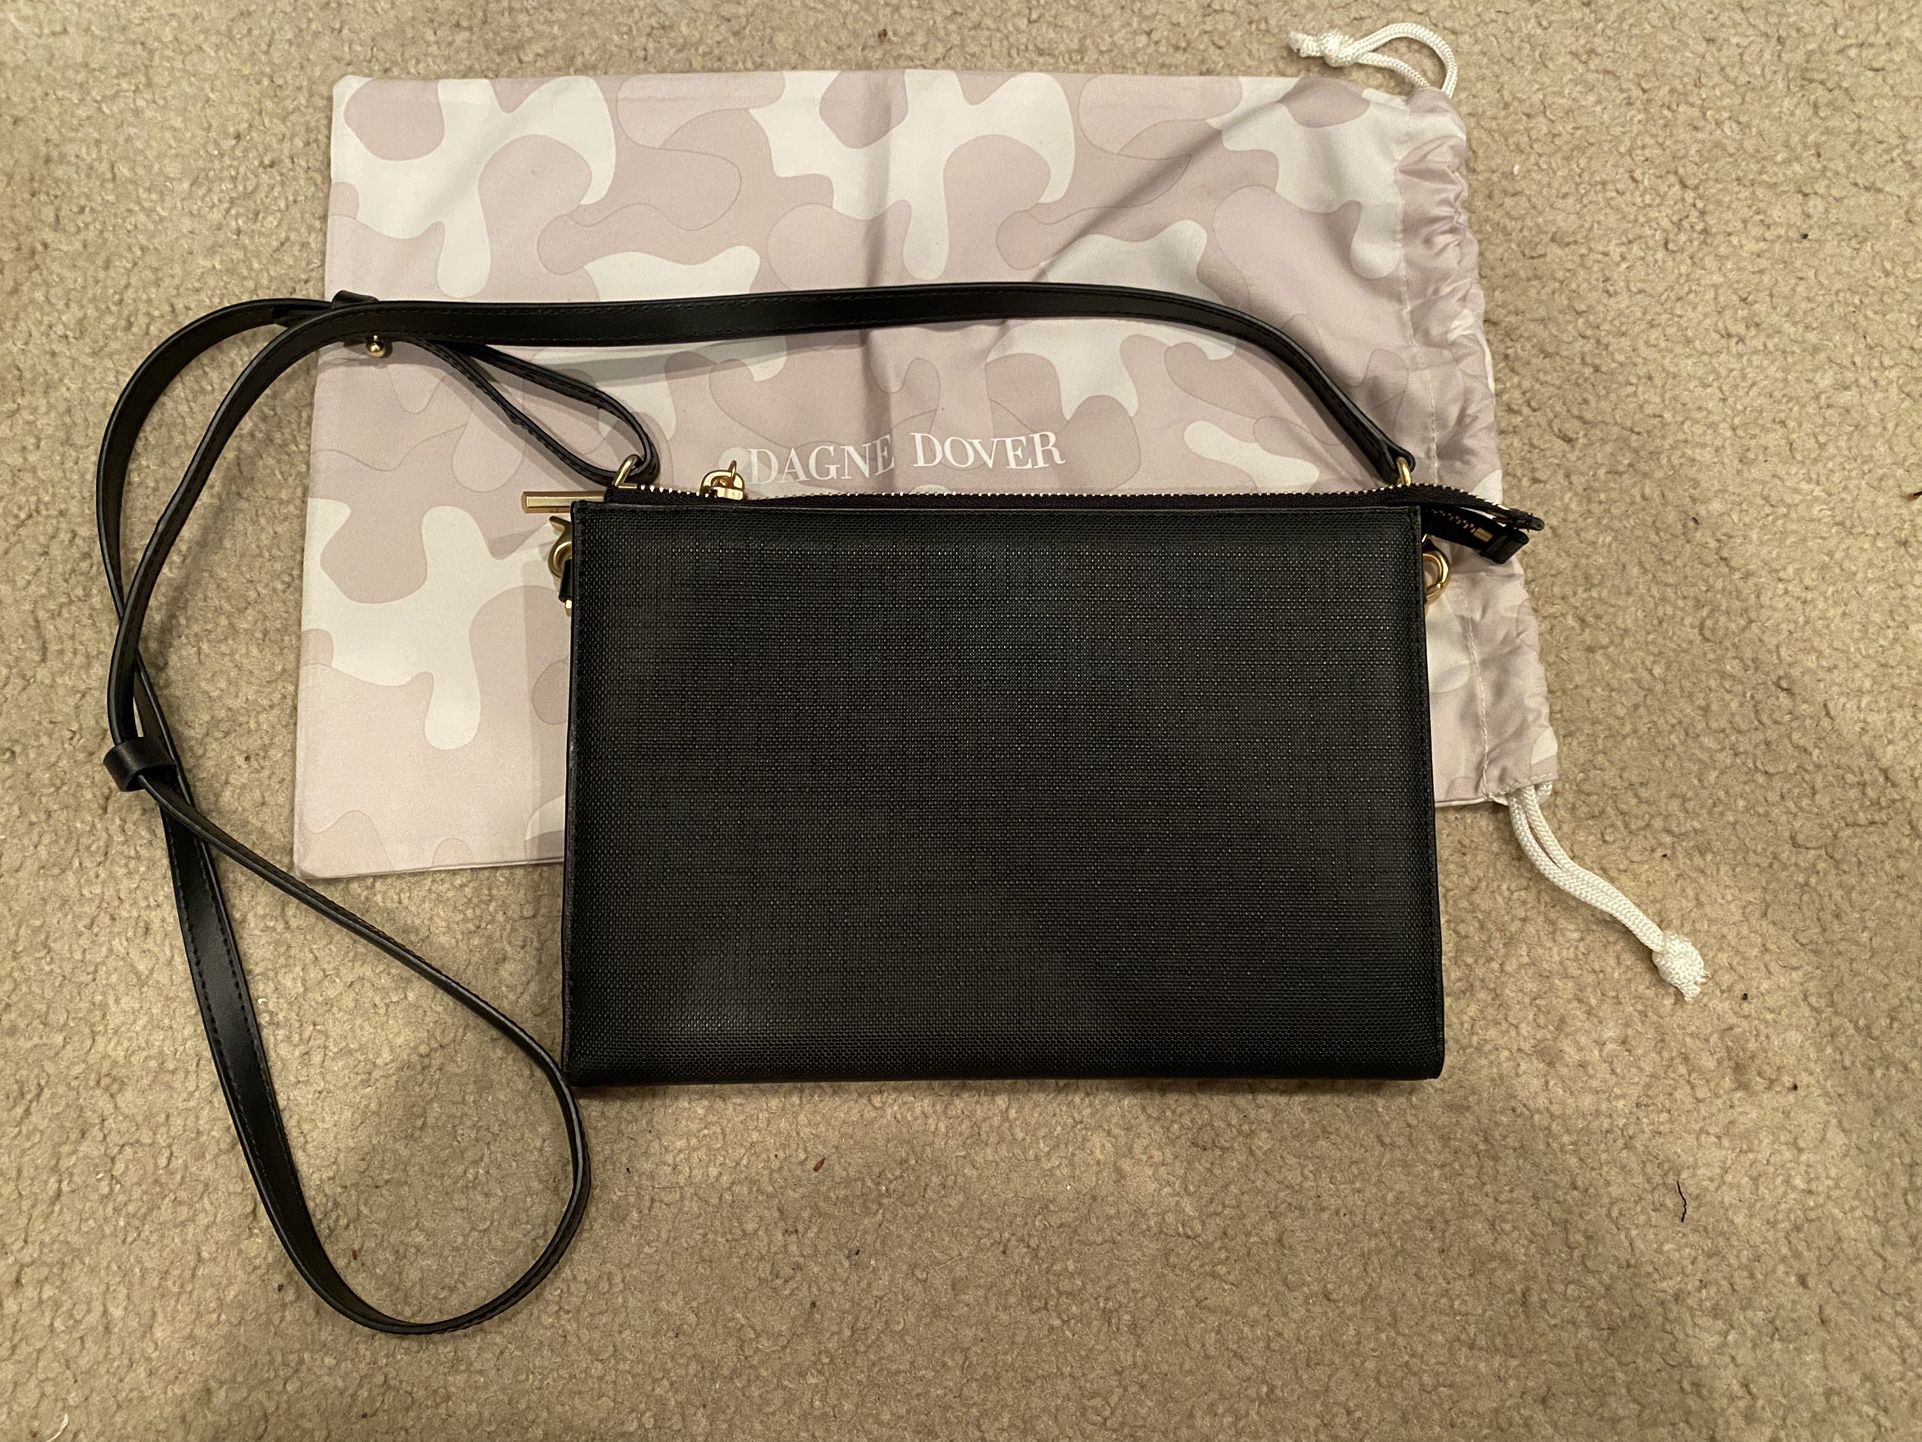 Dagne Dover Essentials Black Clutch Wallet w/ Removable Crossbody Strap-Perfect Condition